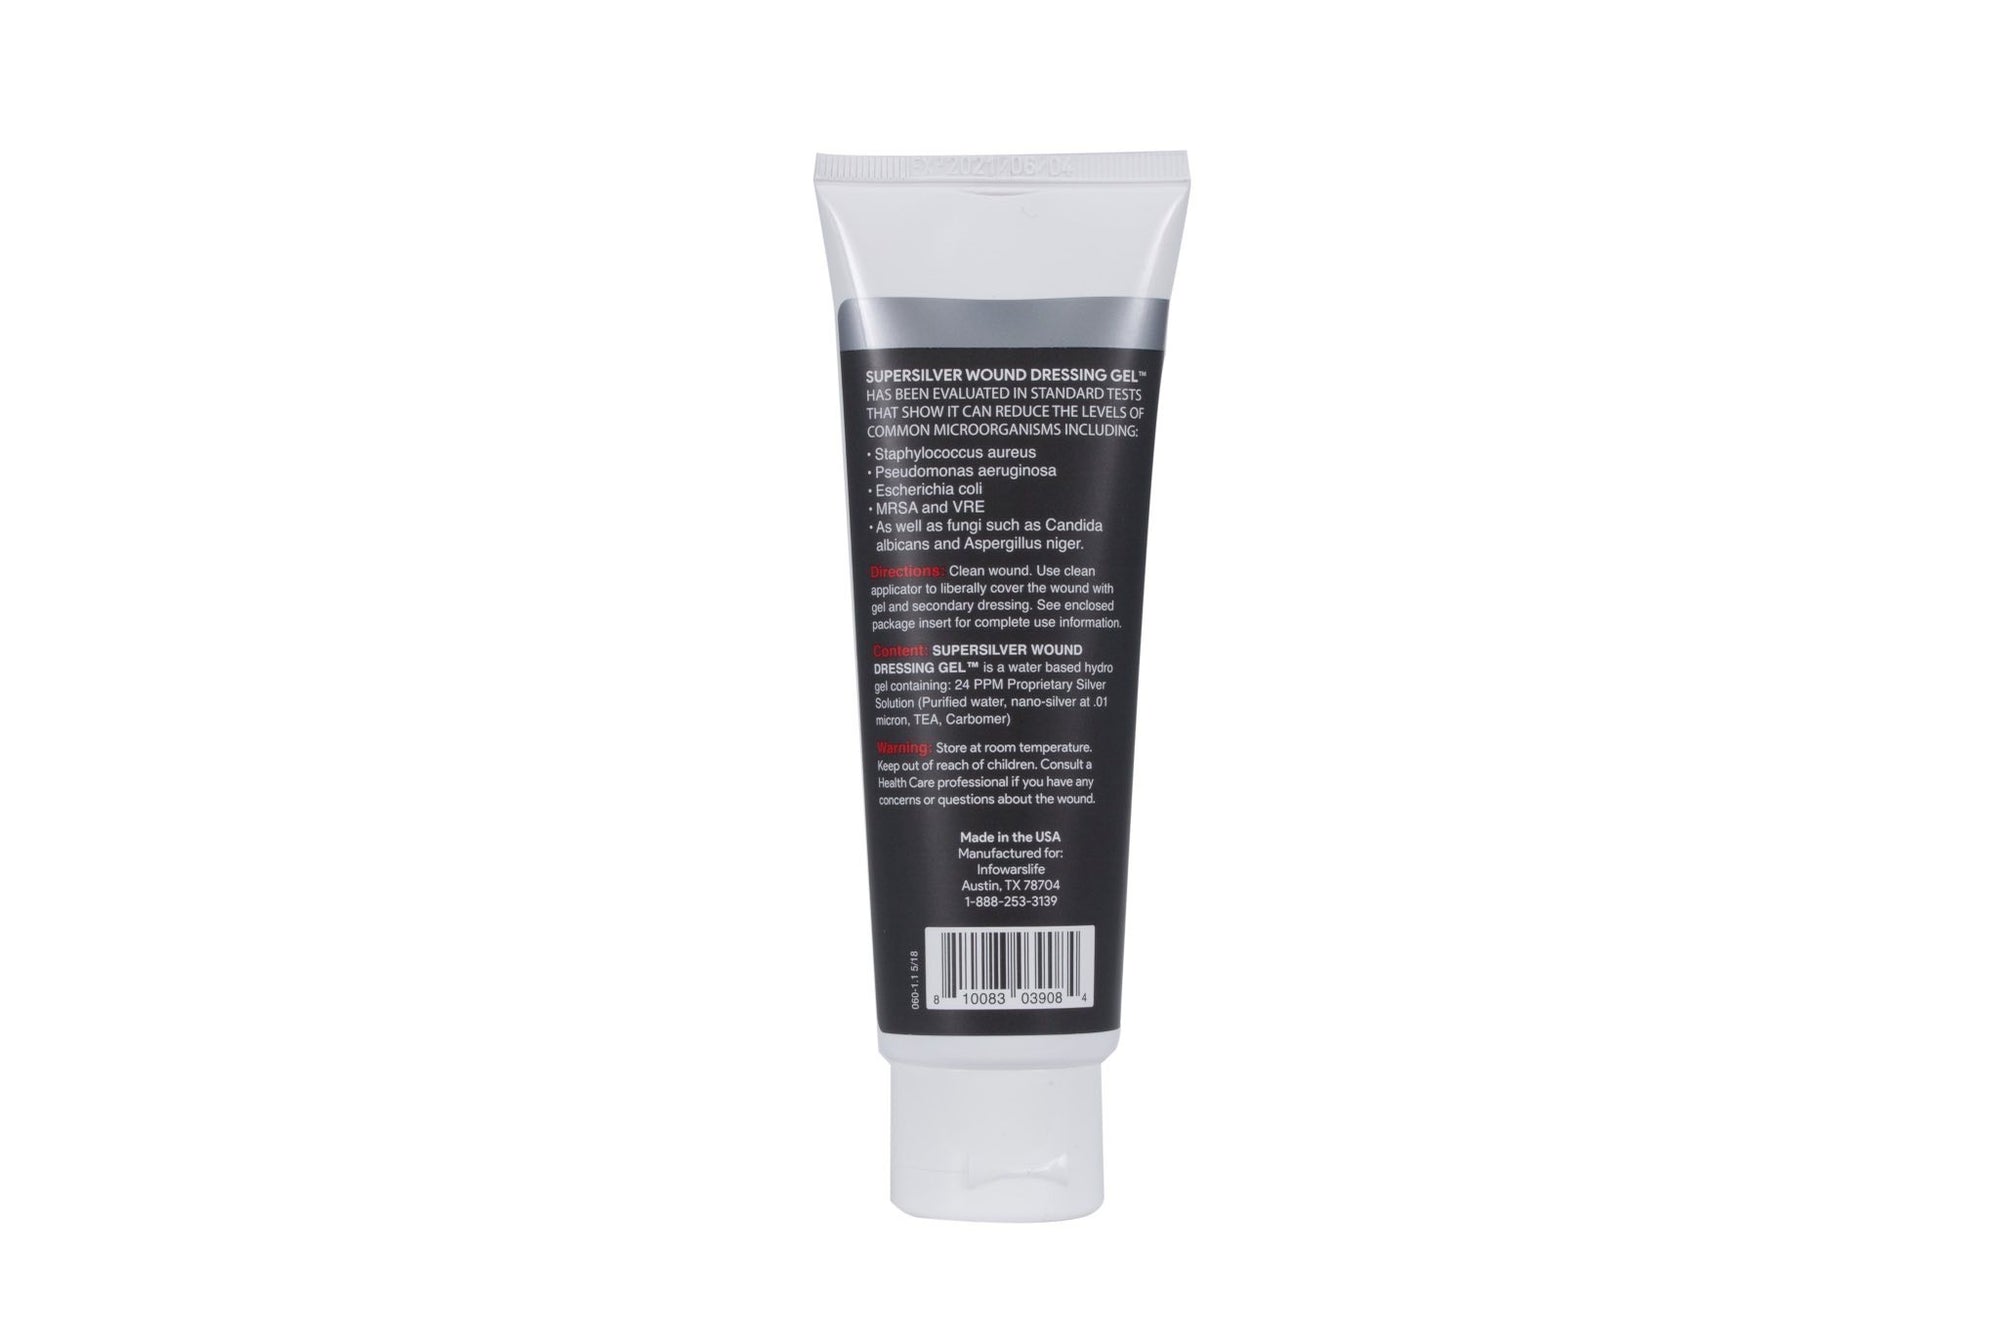 SuperSilver Wound Dressing Gel™ FIRST AID and SUNBURN RELIEF with SILVERSOL® NANO SILVER Directions and Ingredients